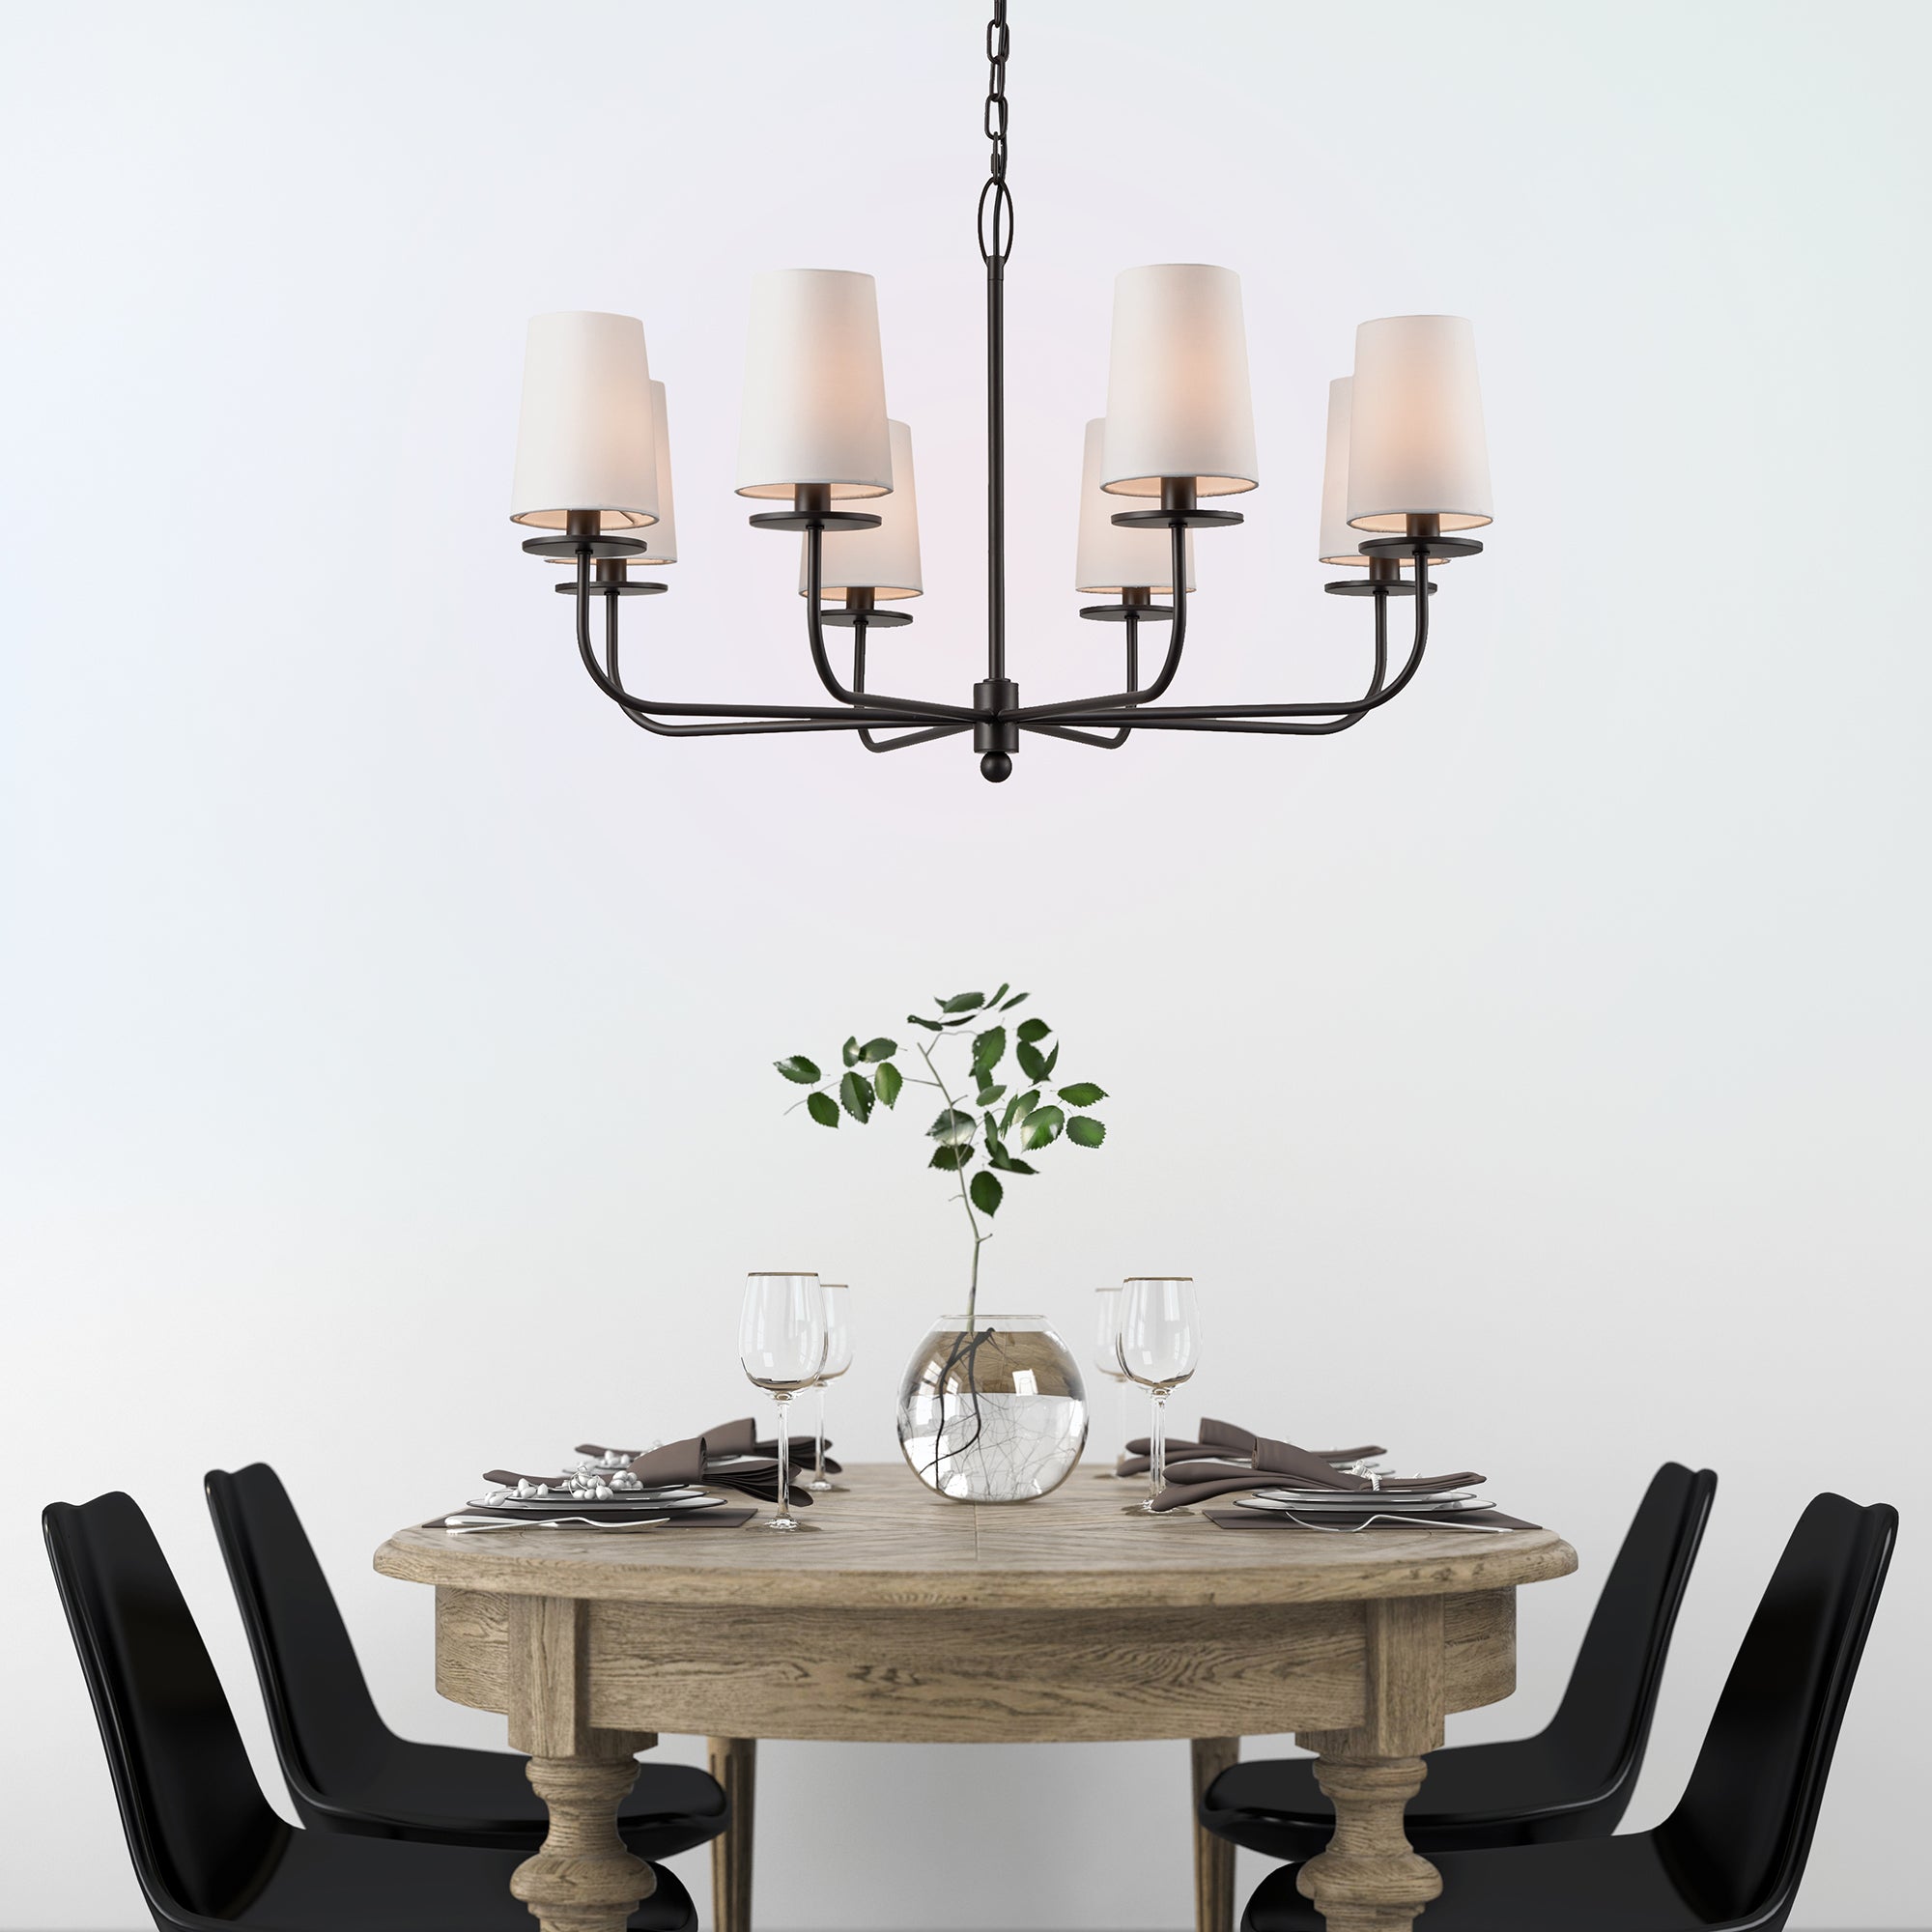 The Neville Chandelier is a fresh take on a classic shape. Subtle modern touches like the tapered shade and oil rubbed bronze finish complete the look. Amethyst Home provides interior design, new construction, custom furniture, and area rugs in the Scottsdale metro area.